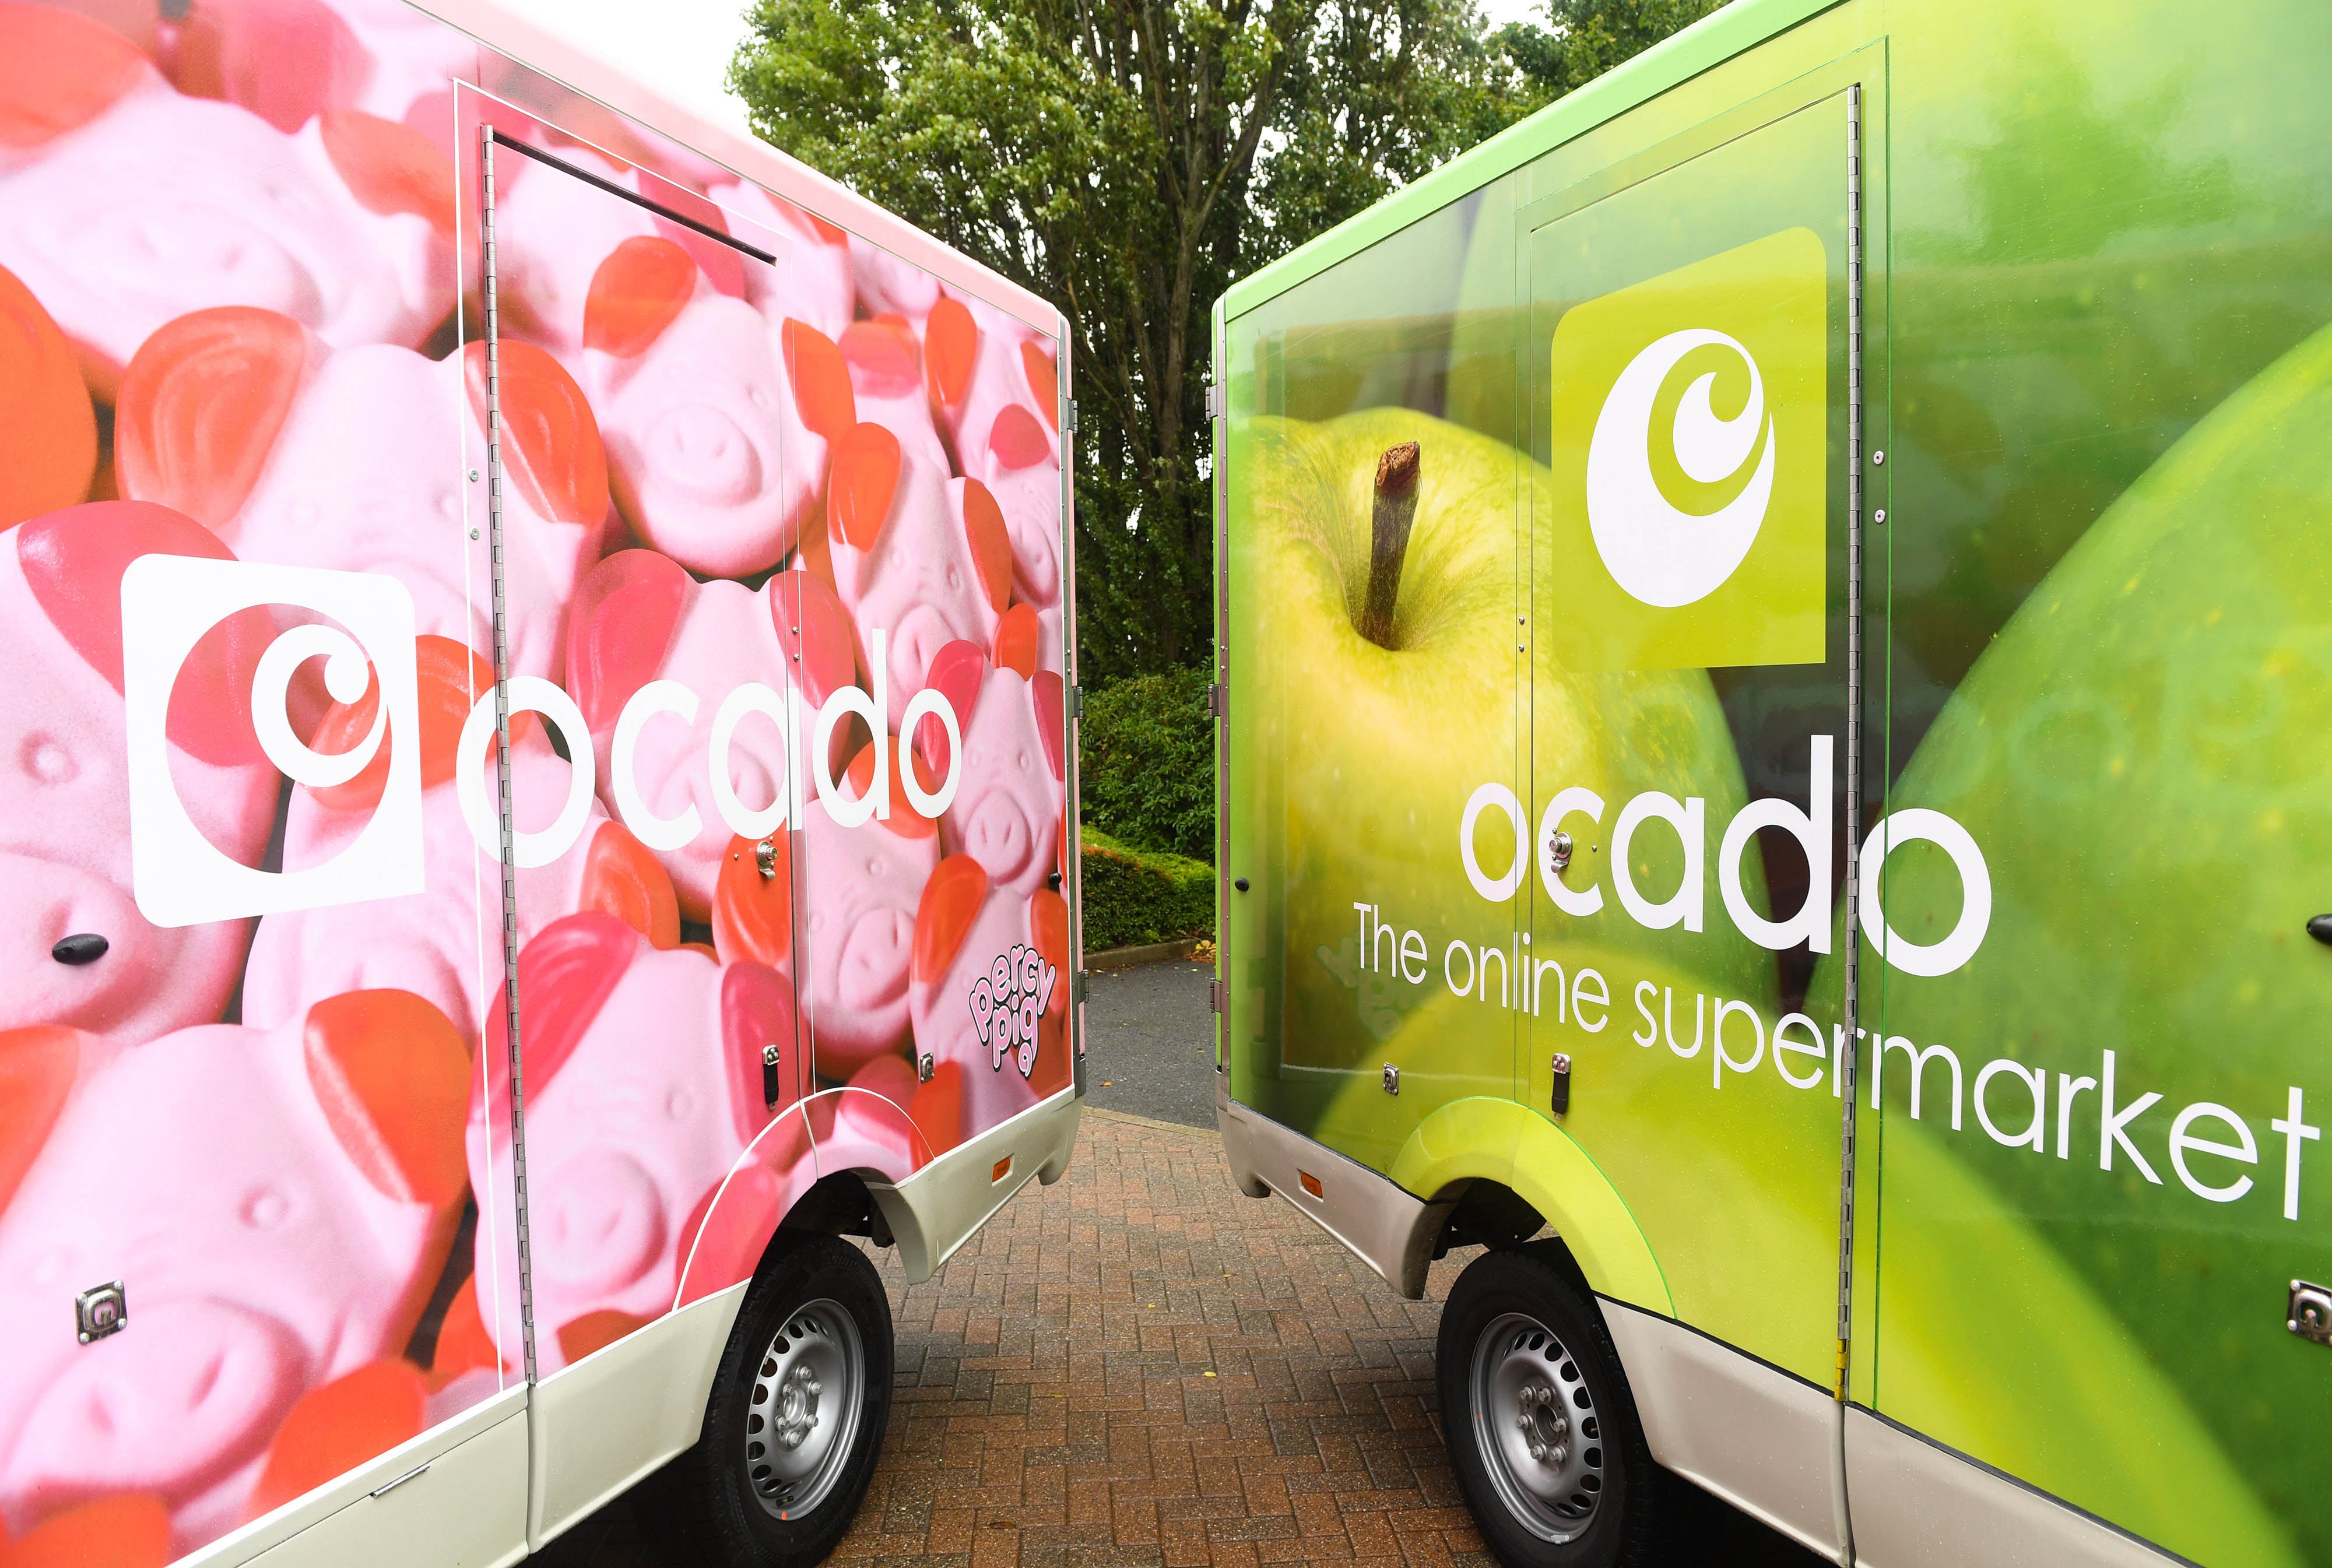 A fleet of Ocado delivery vans, as the online supermarket and technology group has extended its partnership with French retailer Groupe Casino.